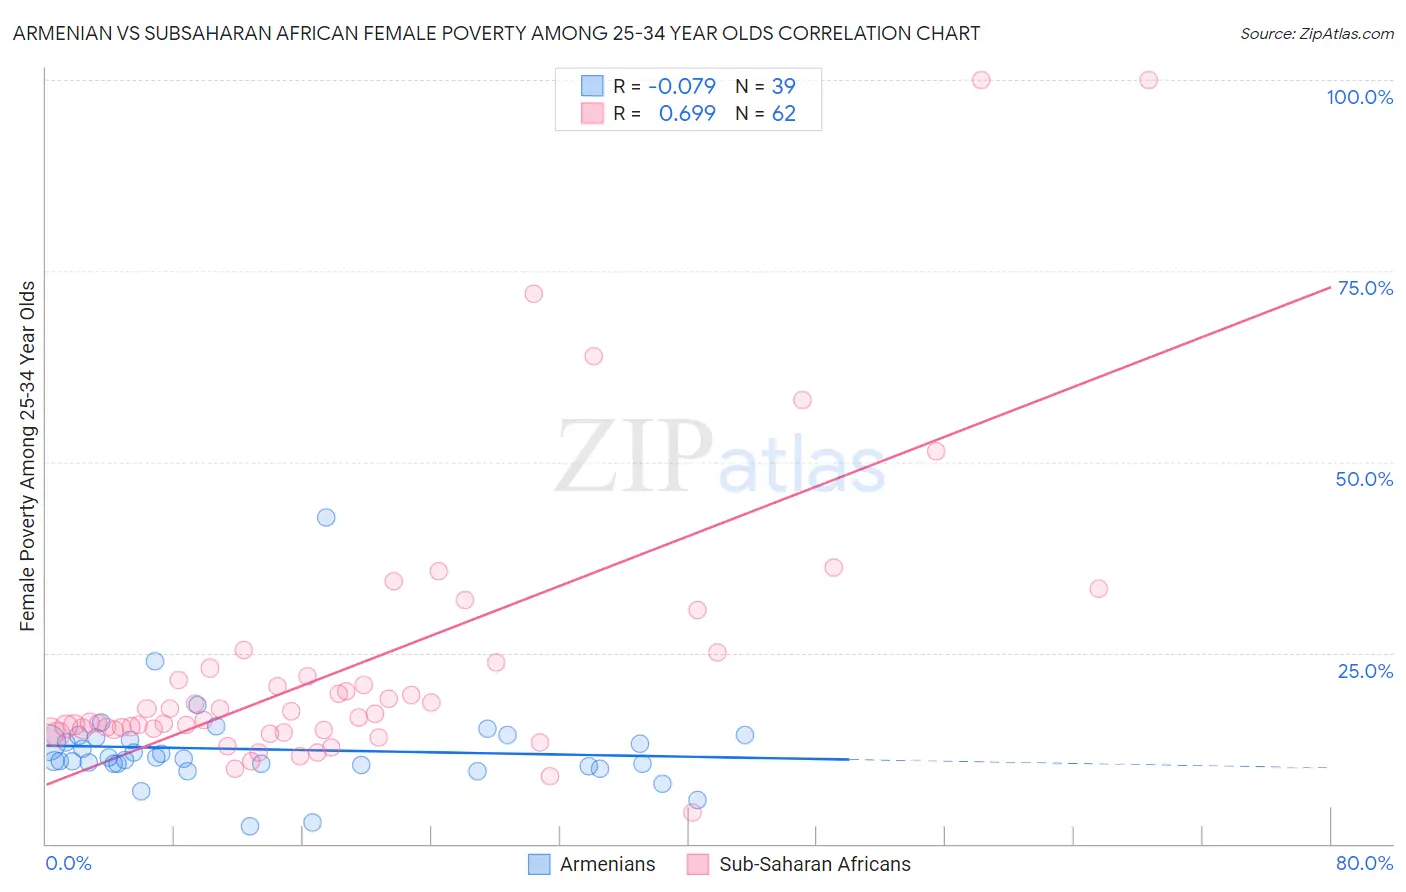 Armenian vs Subsaharan African Female Poverty Among 25-34 Year Olds